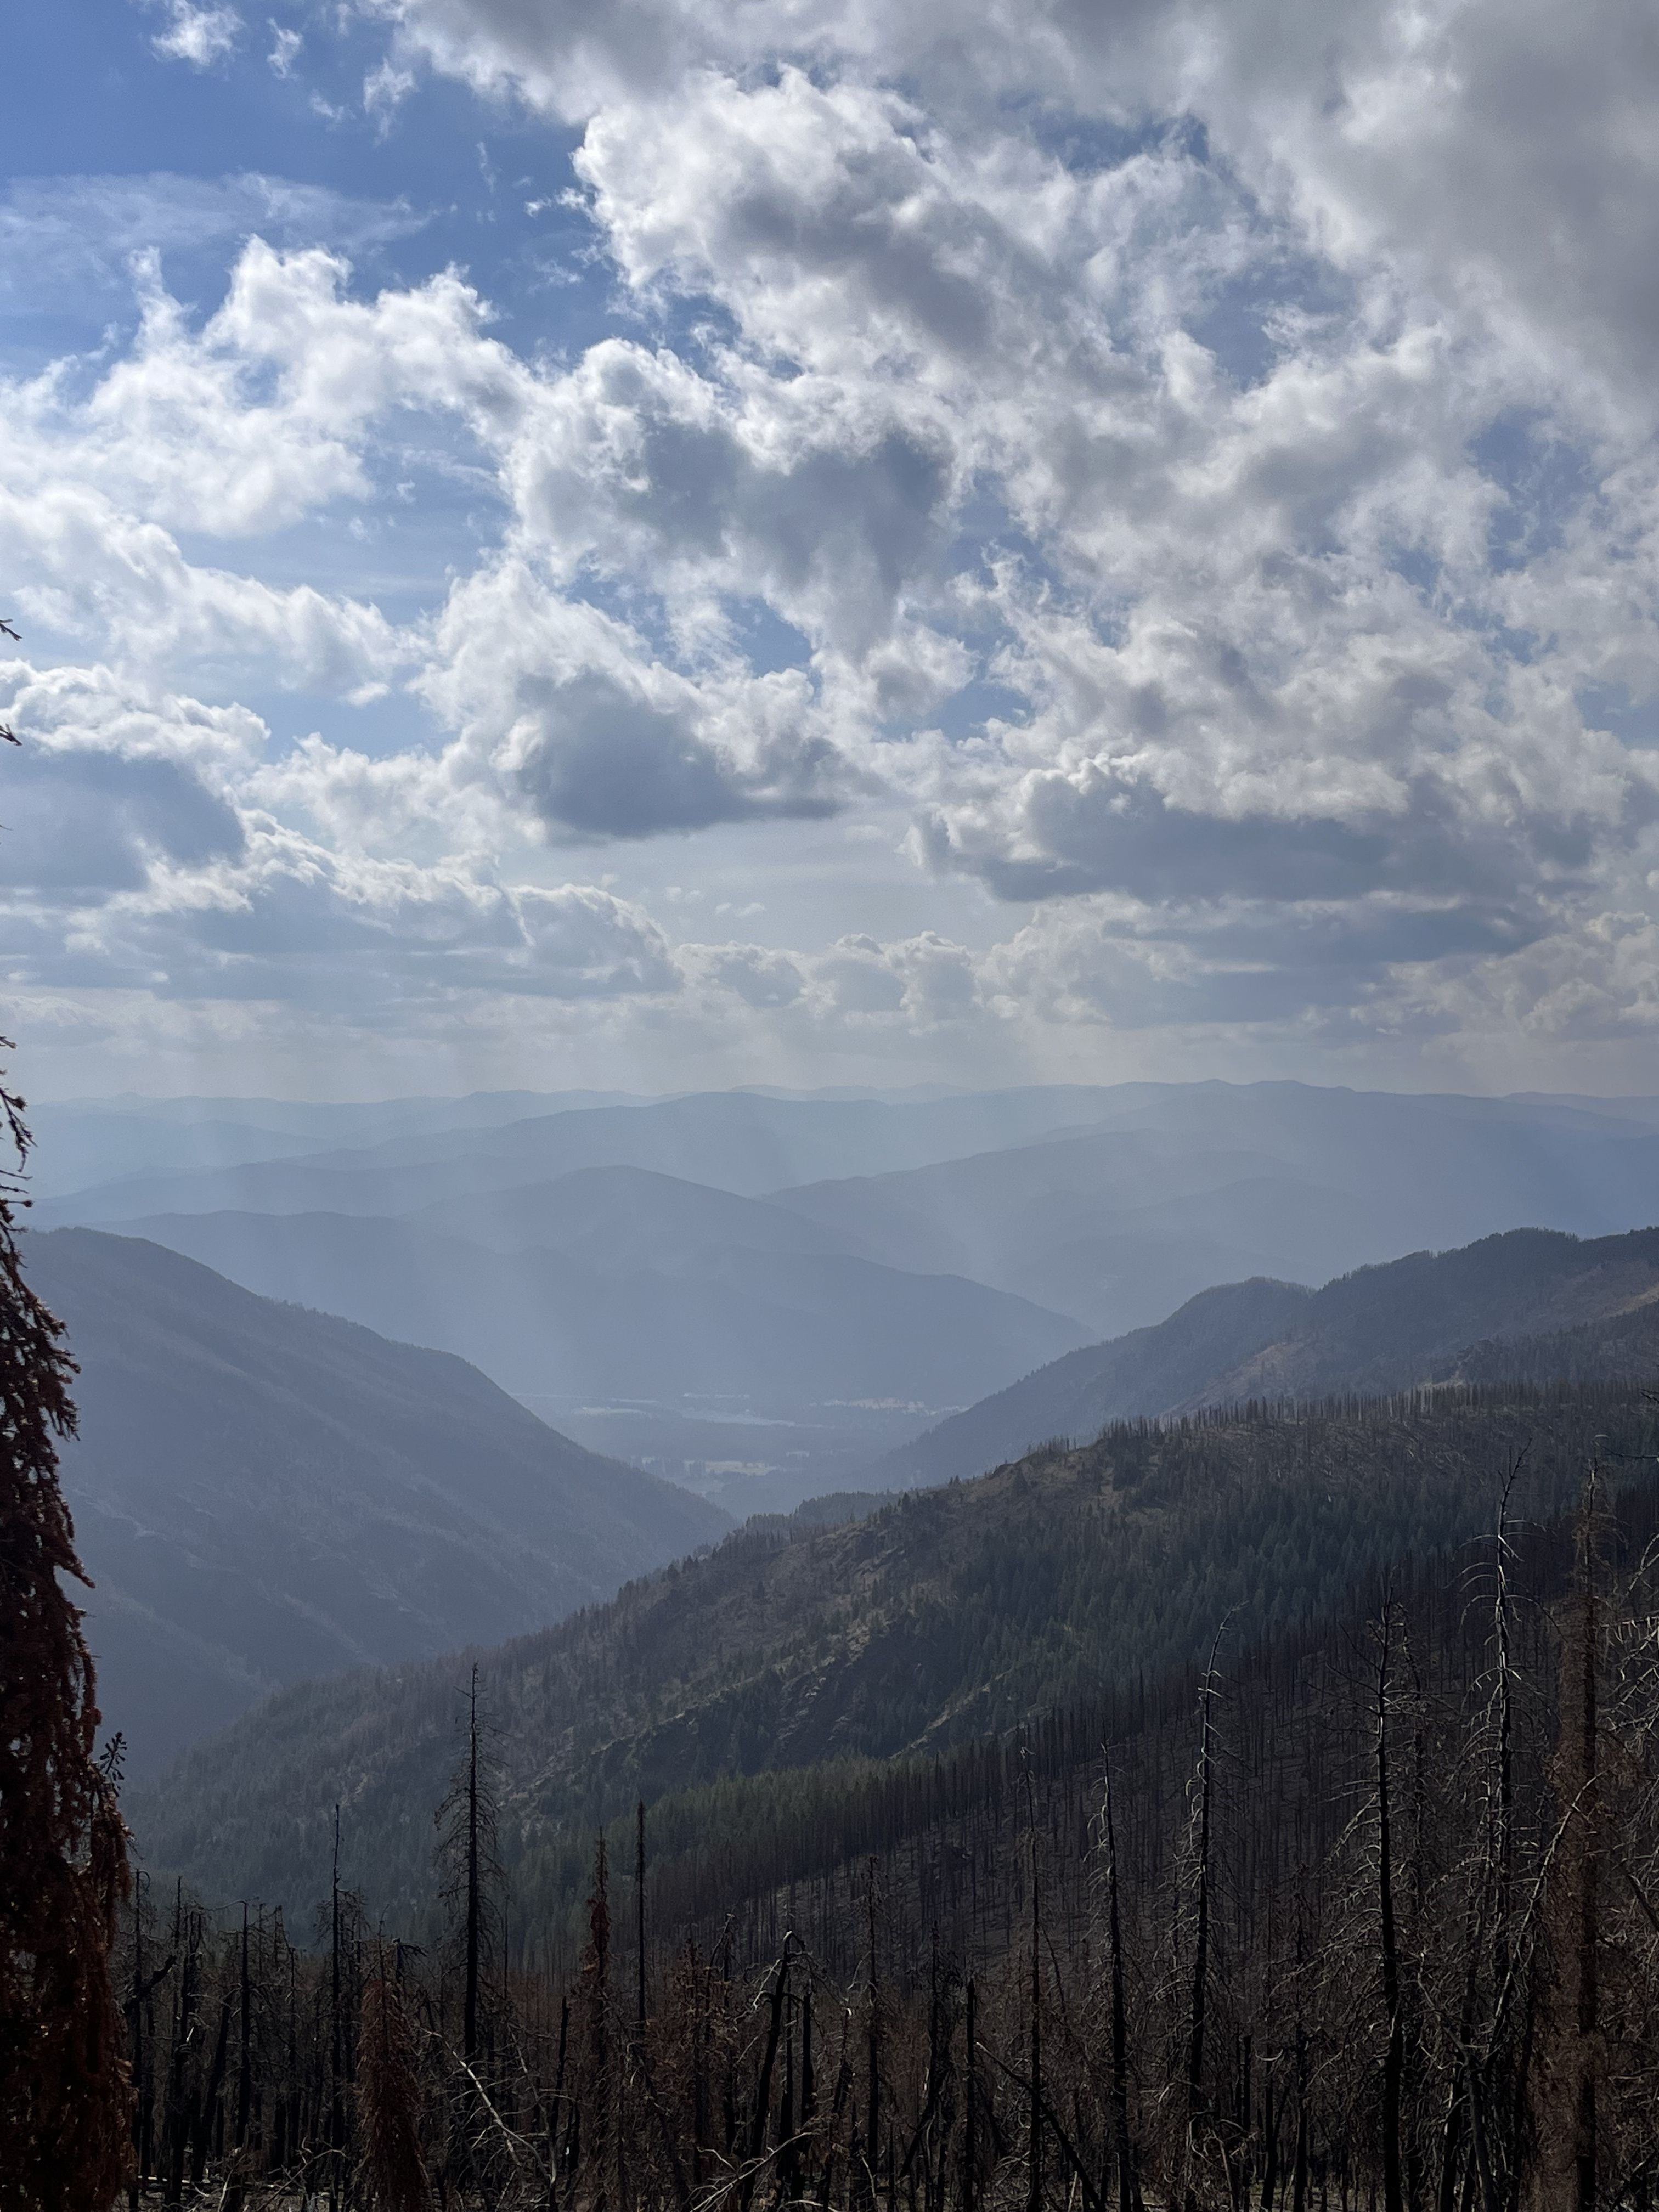 A view from above into a valley below. Everything is blue and hazy with wildfire smoke.